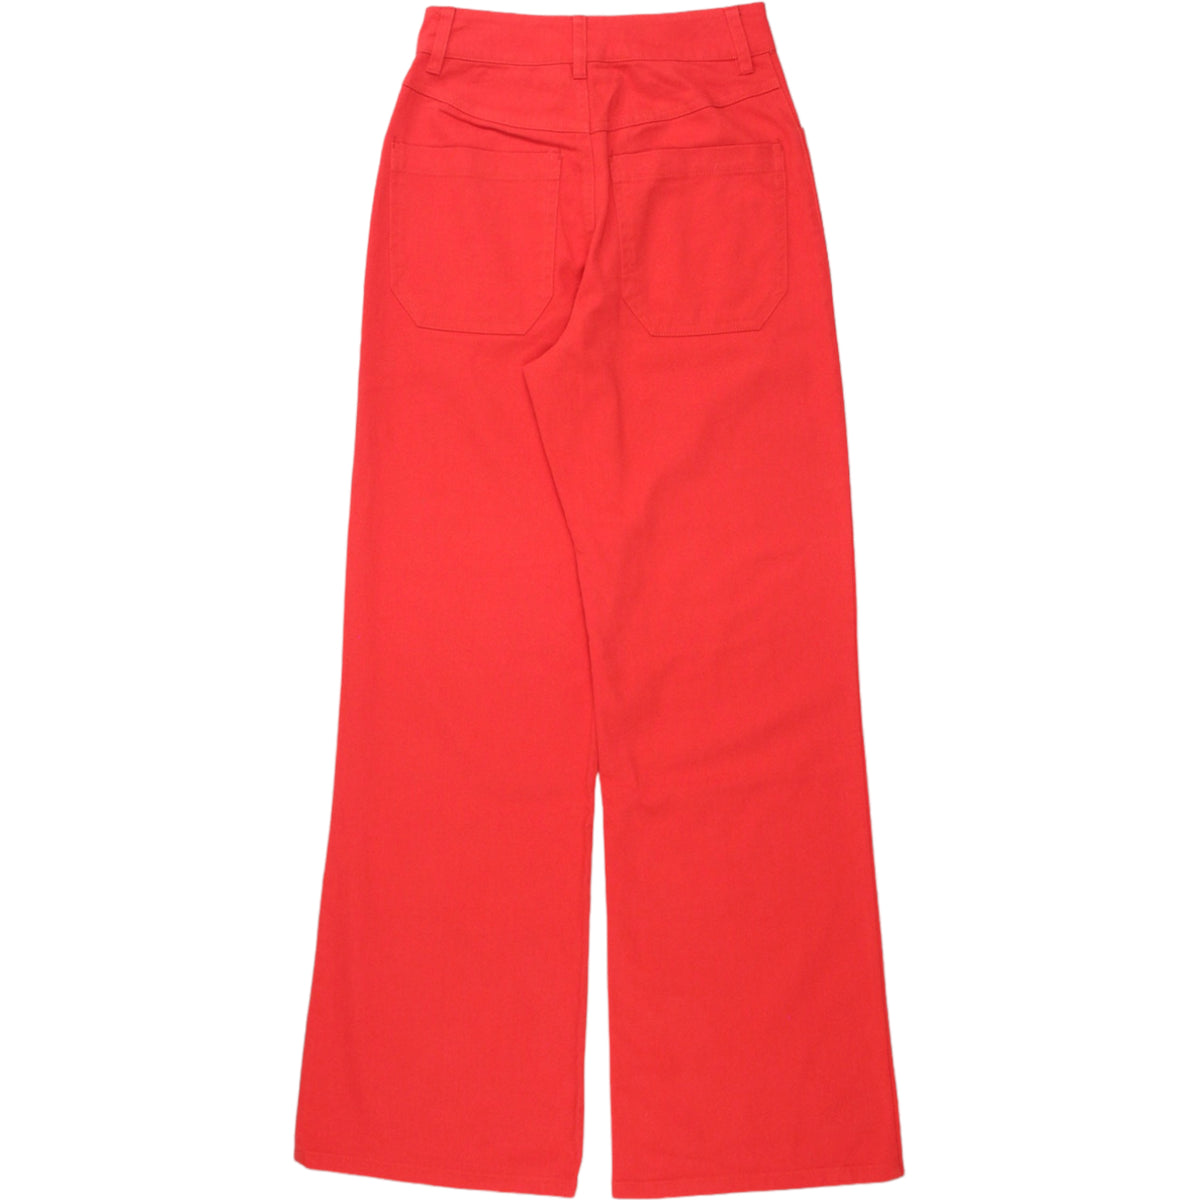 LF Markey Red Canvas Didion Trousers